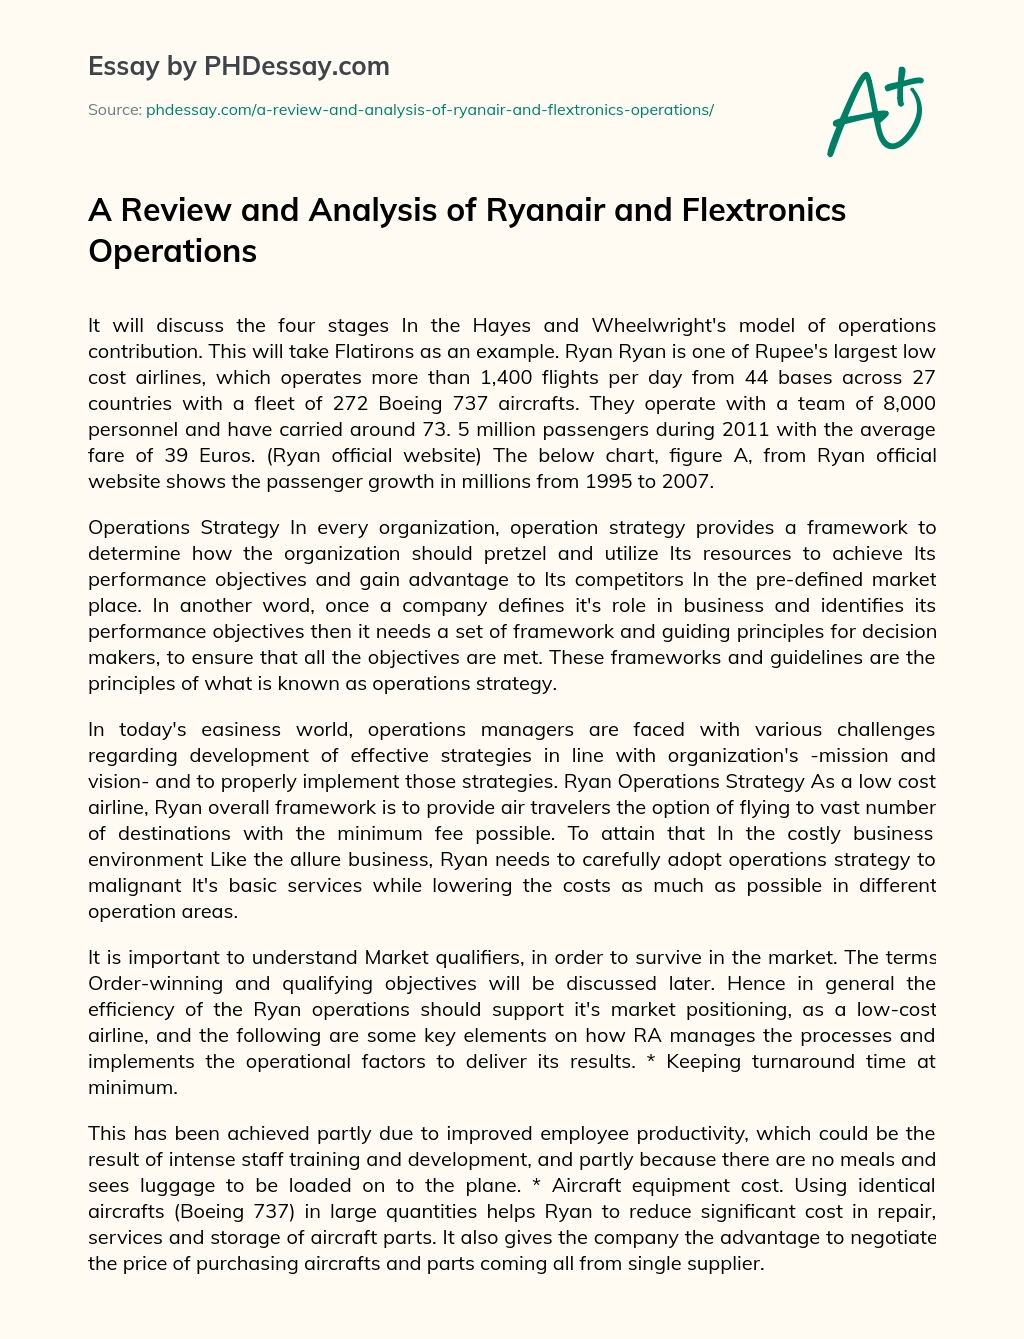 A Review and Analysis of Ryanair and Flextronics Operations essay